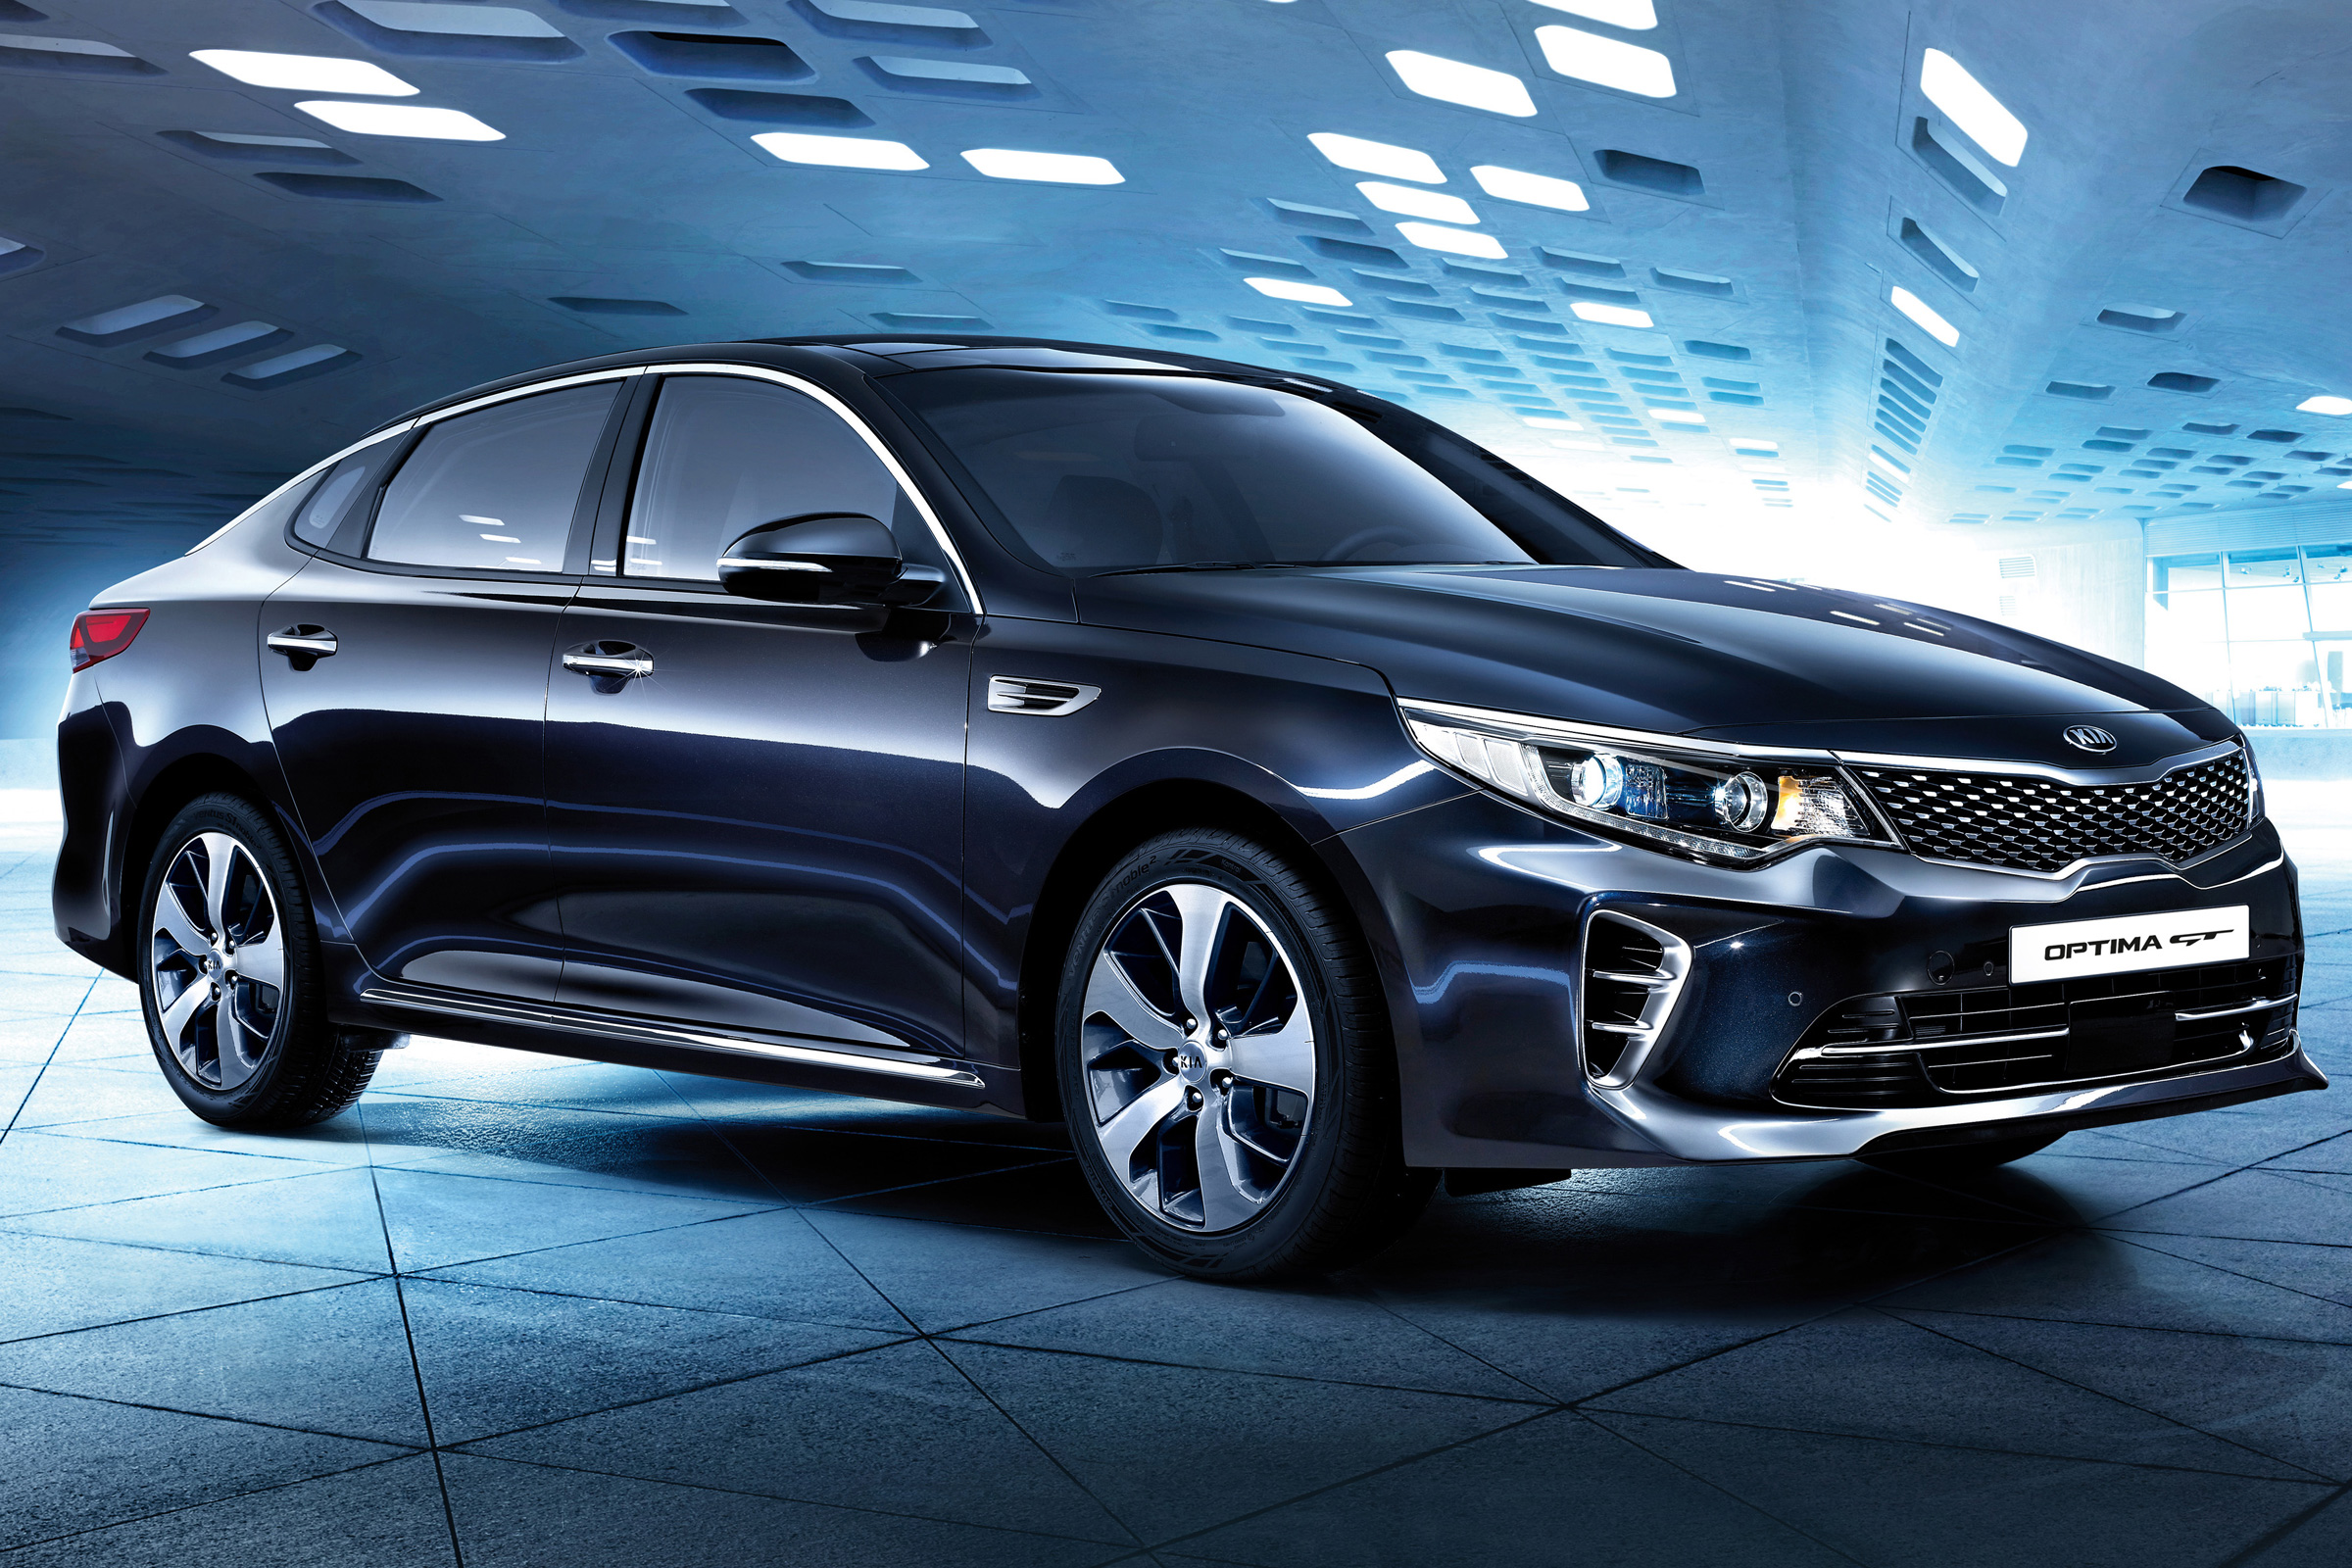 New Kia Optima prices, specs and release date Carbuyer